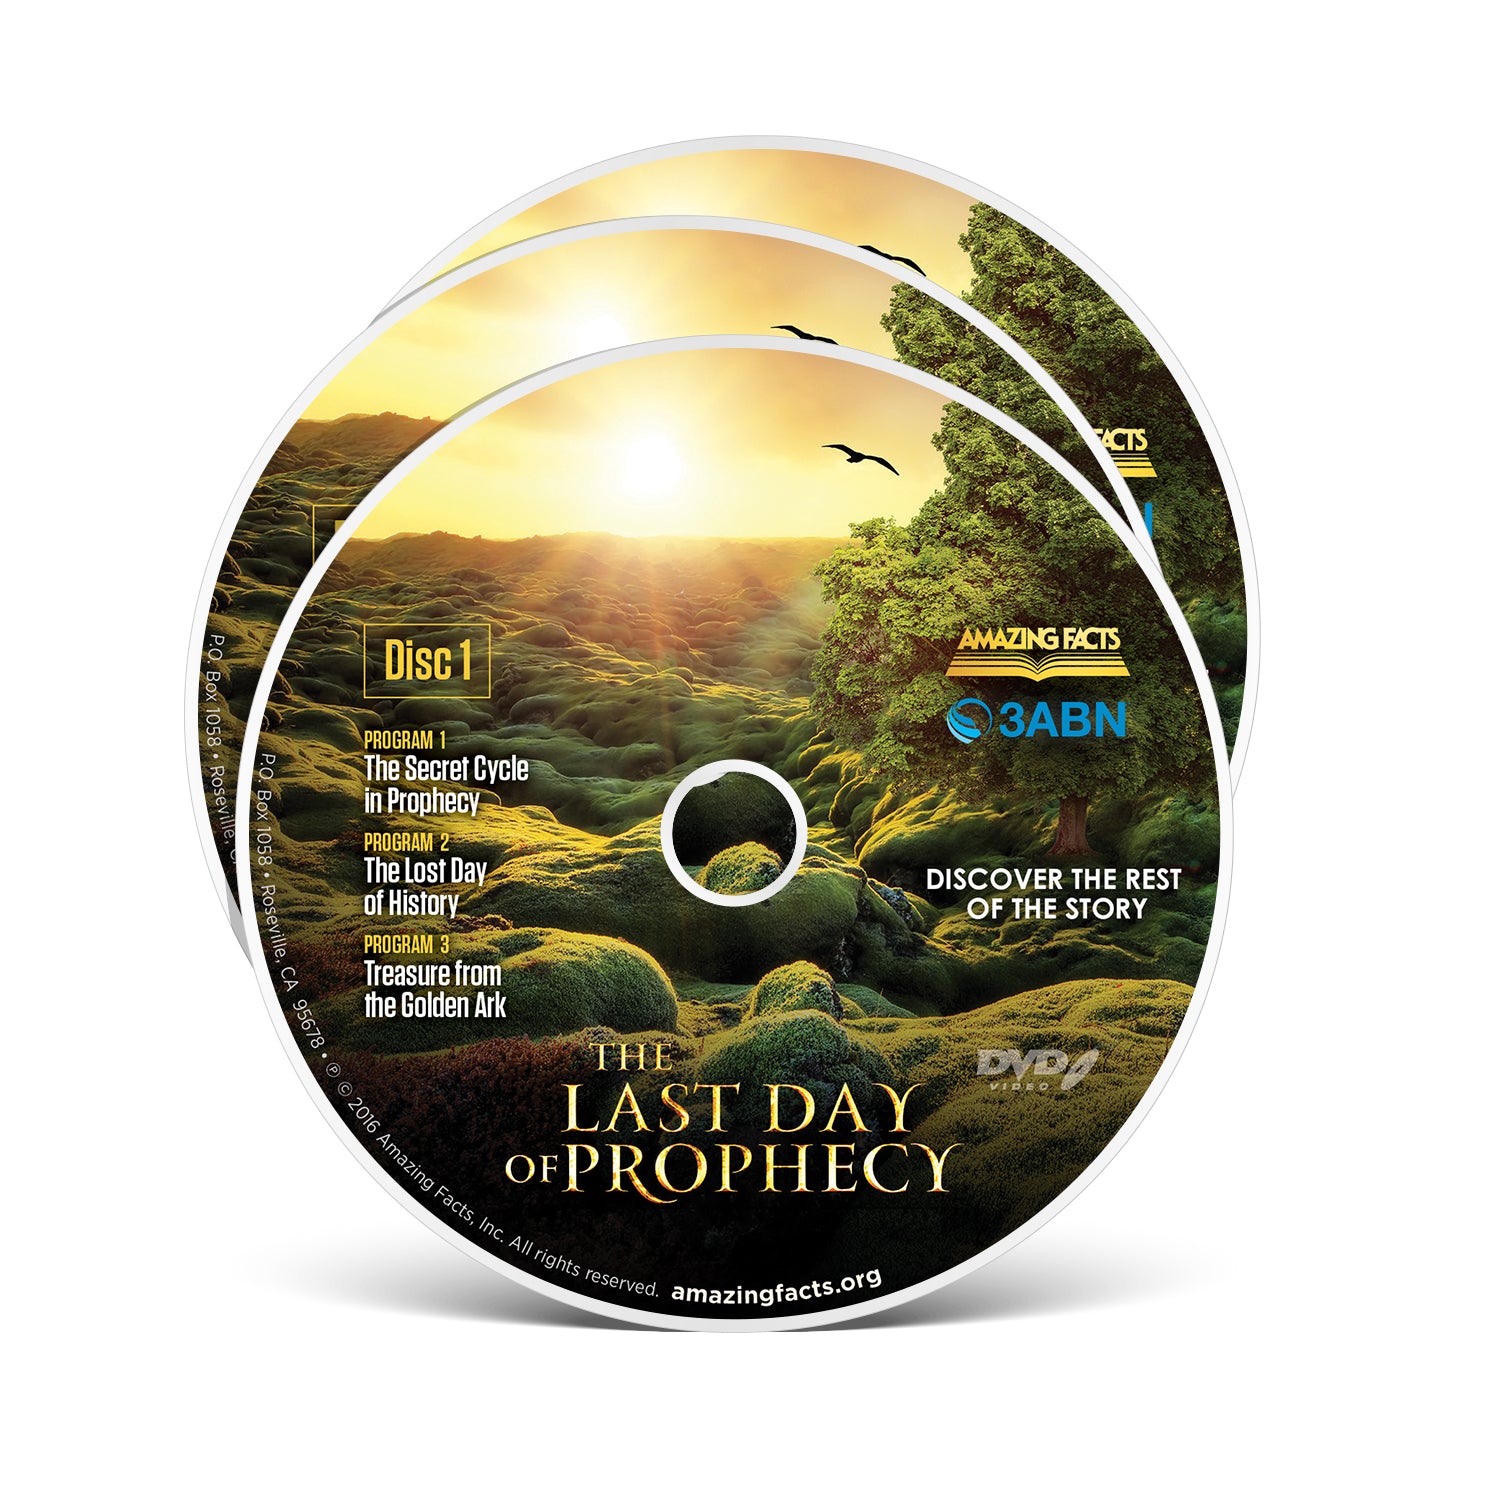 The Last Day of Prophecy DVD Set by Doug Batchelor